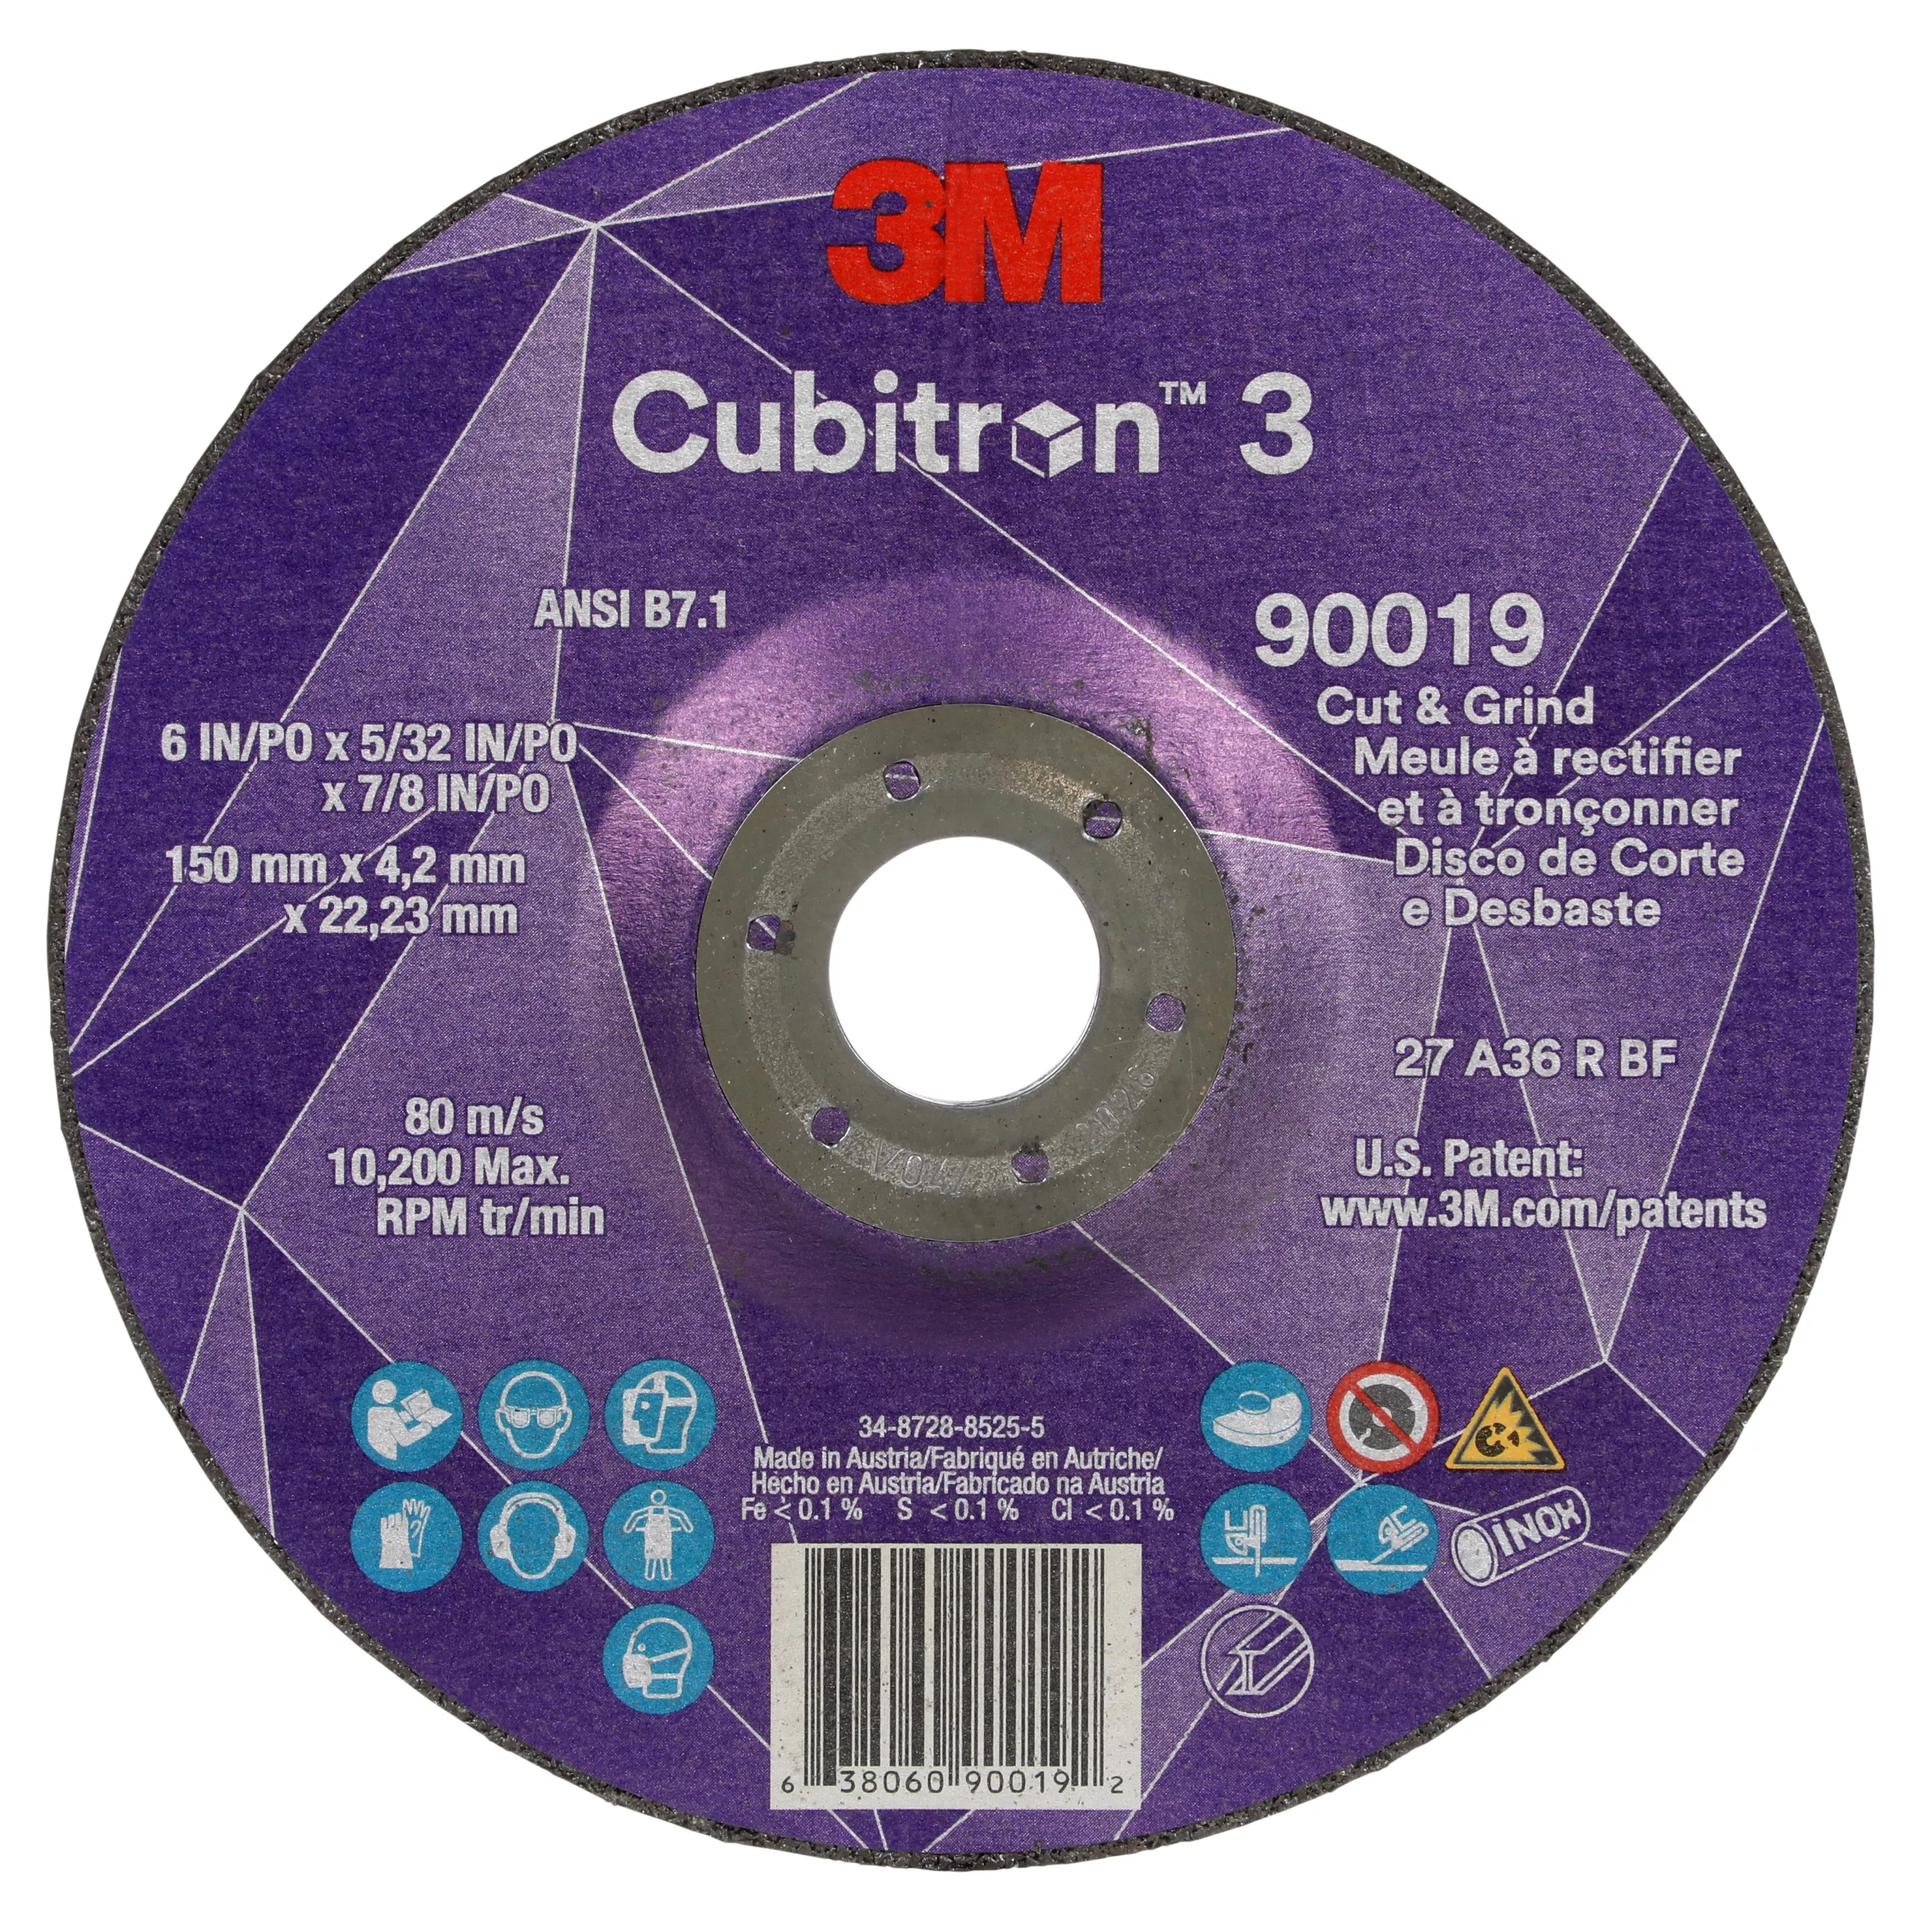 3M™ Cubitron™ 3 Cut and Grind Wheel, 90019, 36+, T27, 6 in x 5/32 in x
7/8 in (150 x 4.2 x 22.23 mm), ANSI, 10/Pack, 20 ea/Case